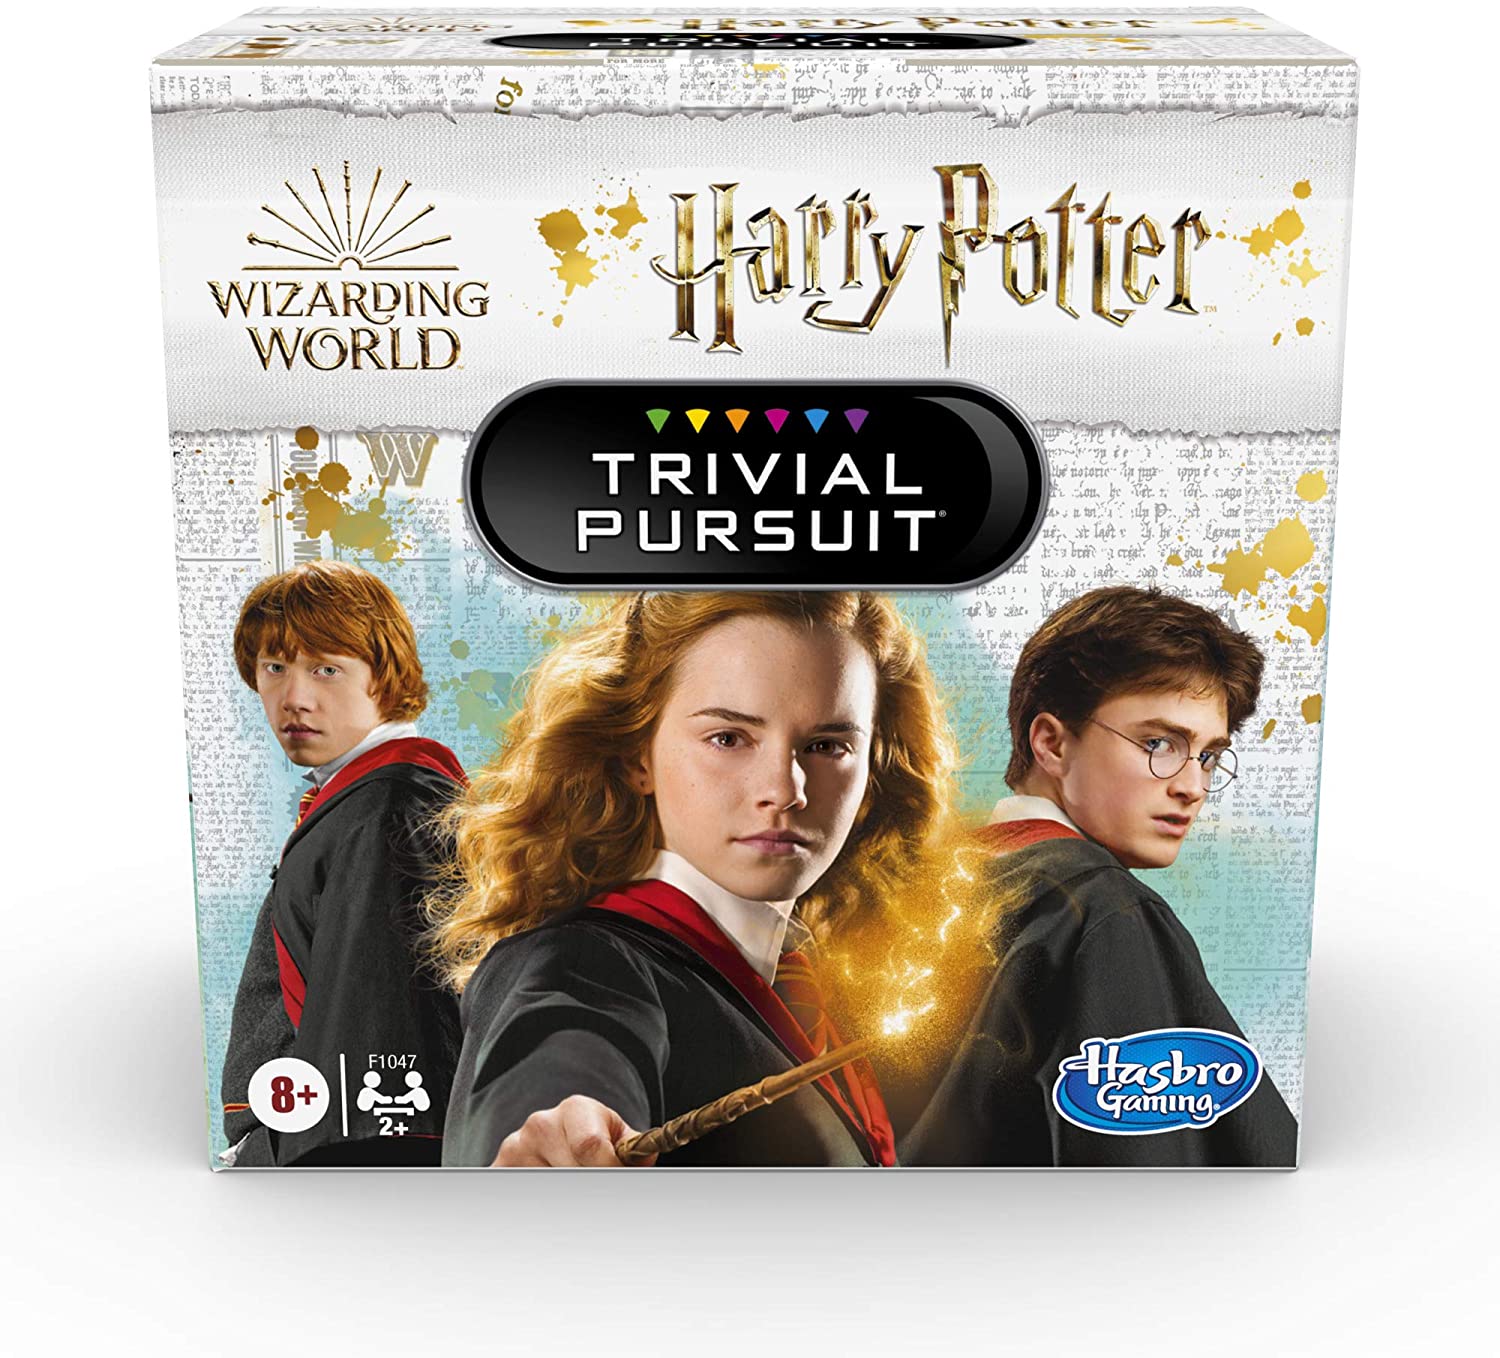 Hasbro Gaming Trivial Pursuit- Wizarding World Harry Potter Edition Compact Trivia Game